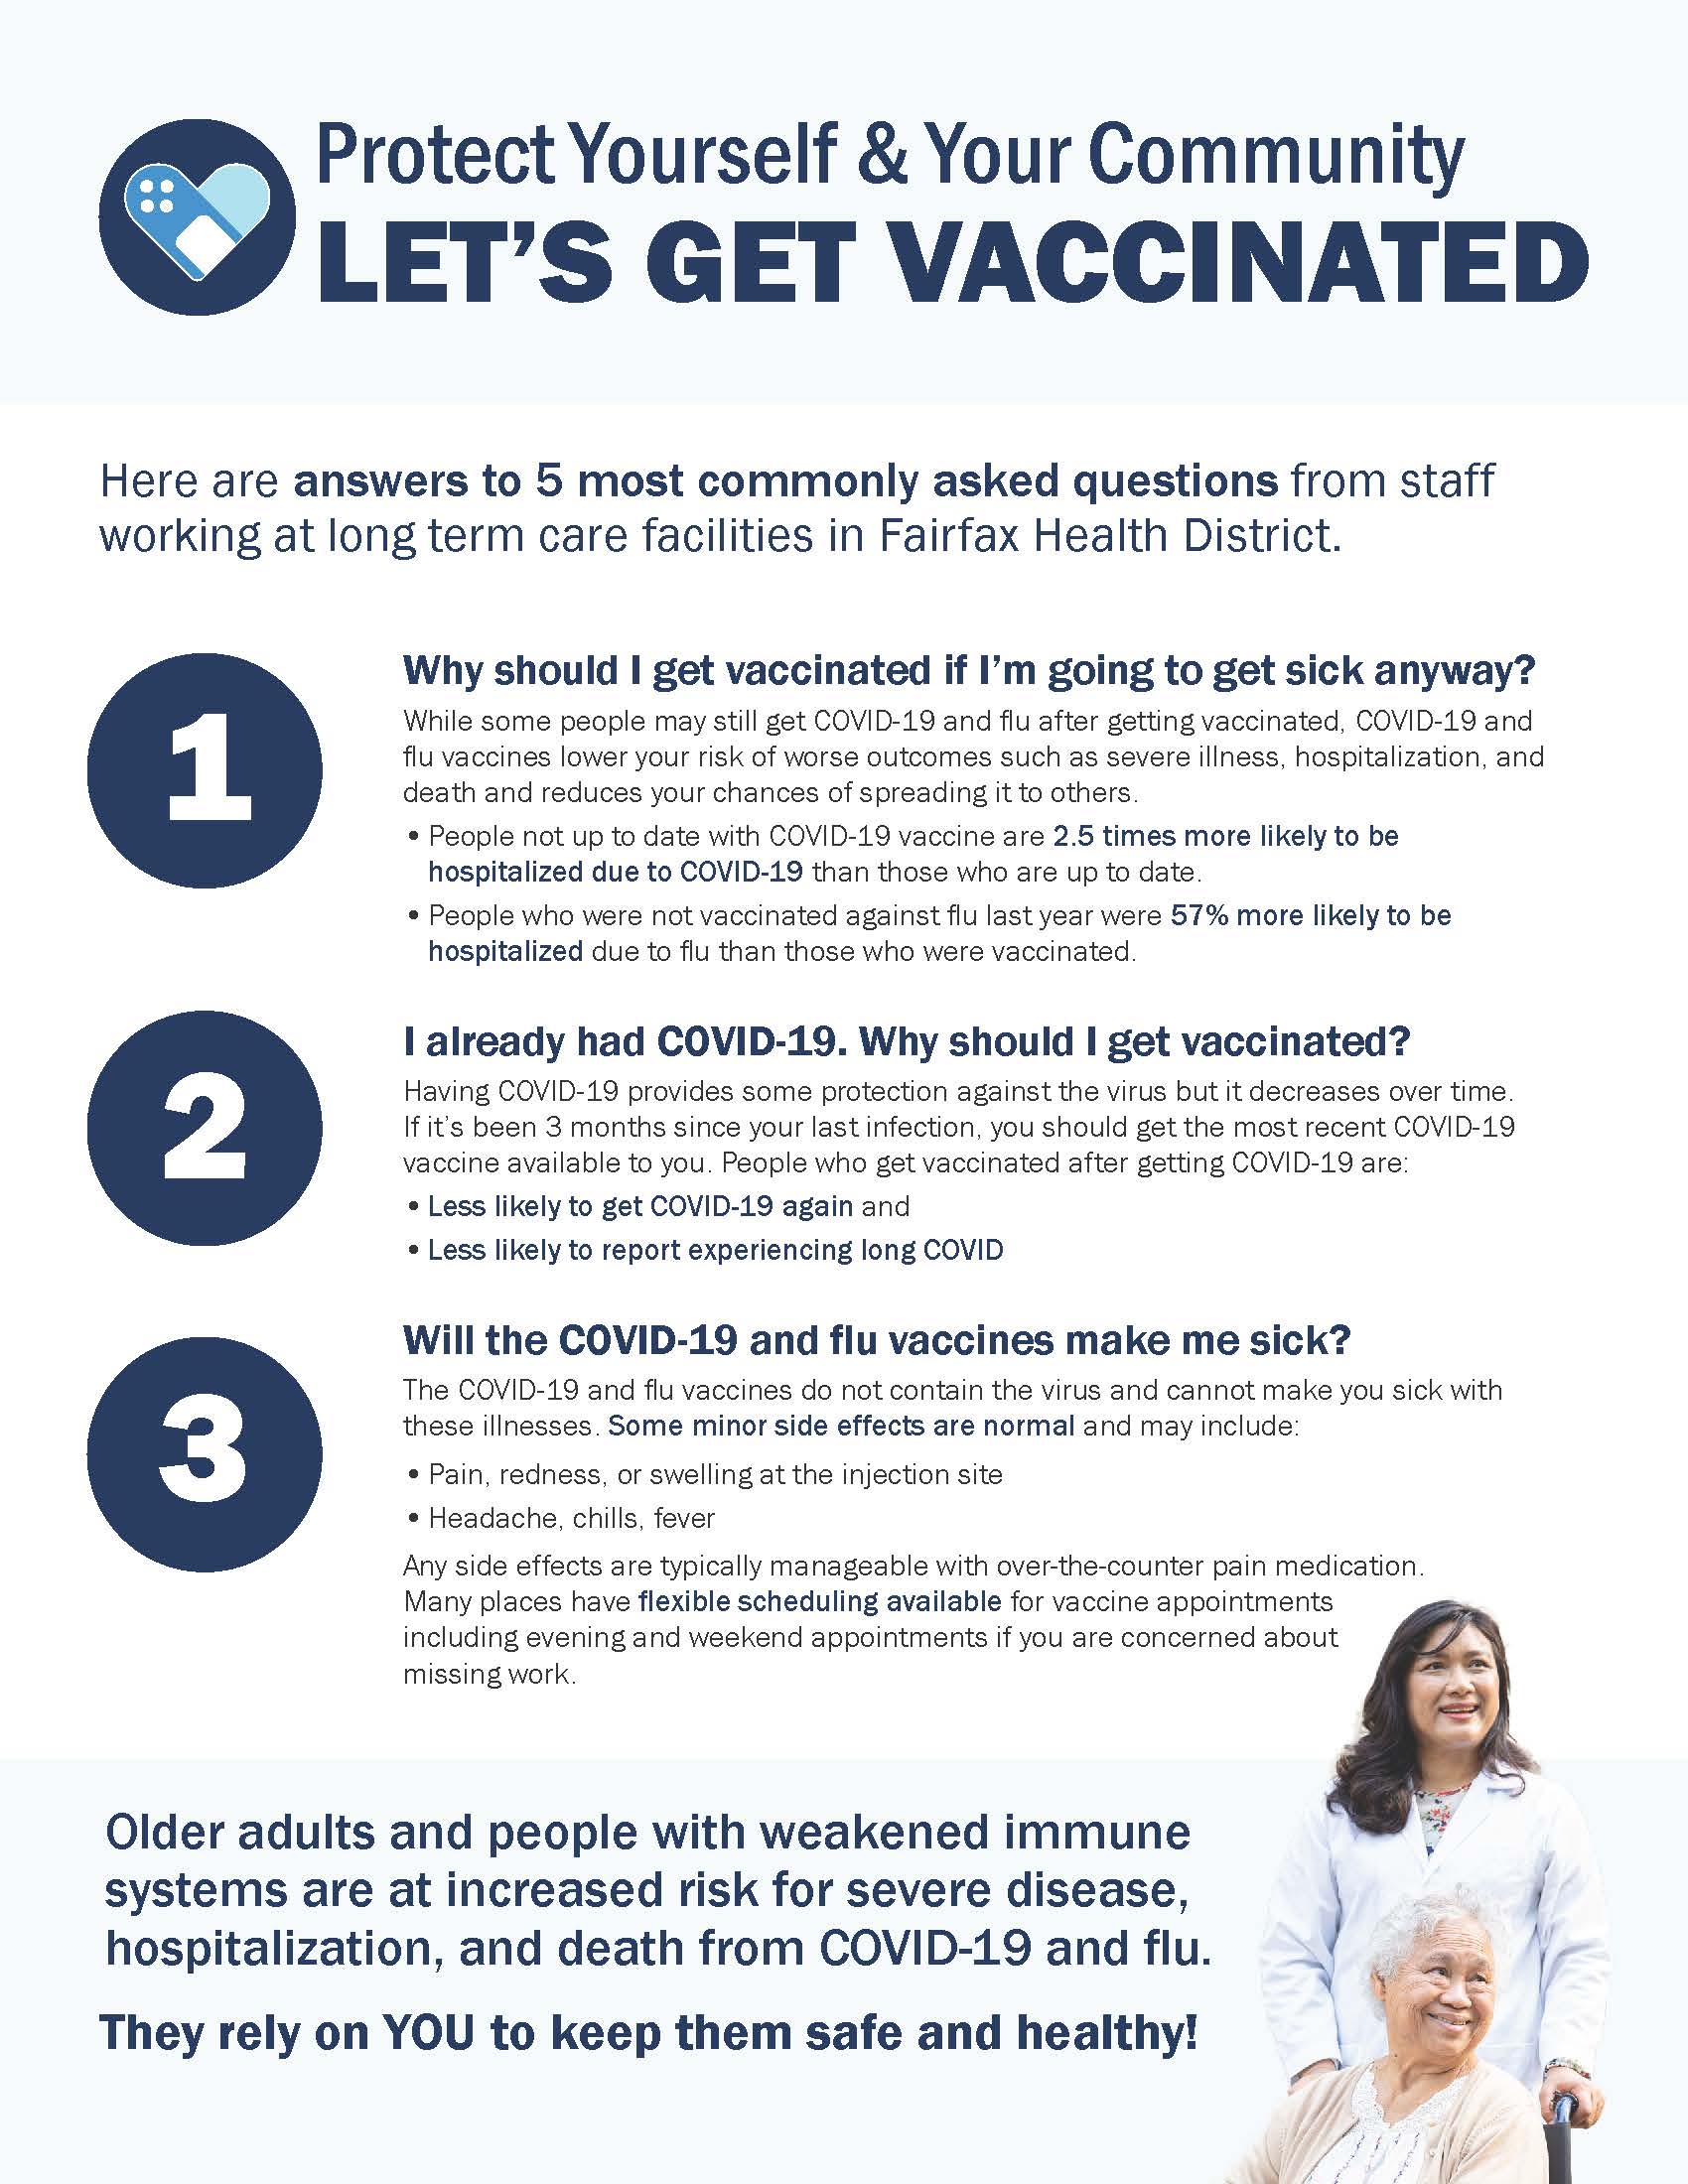 Let's get vaccinated handout